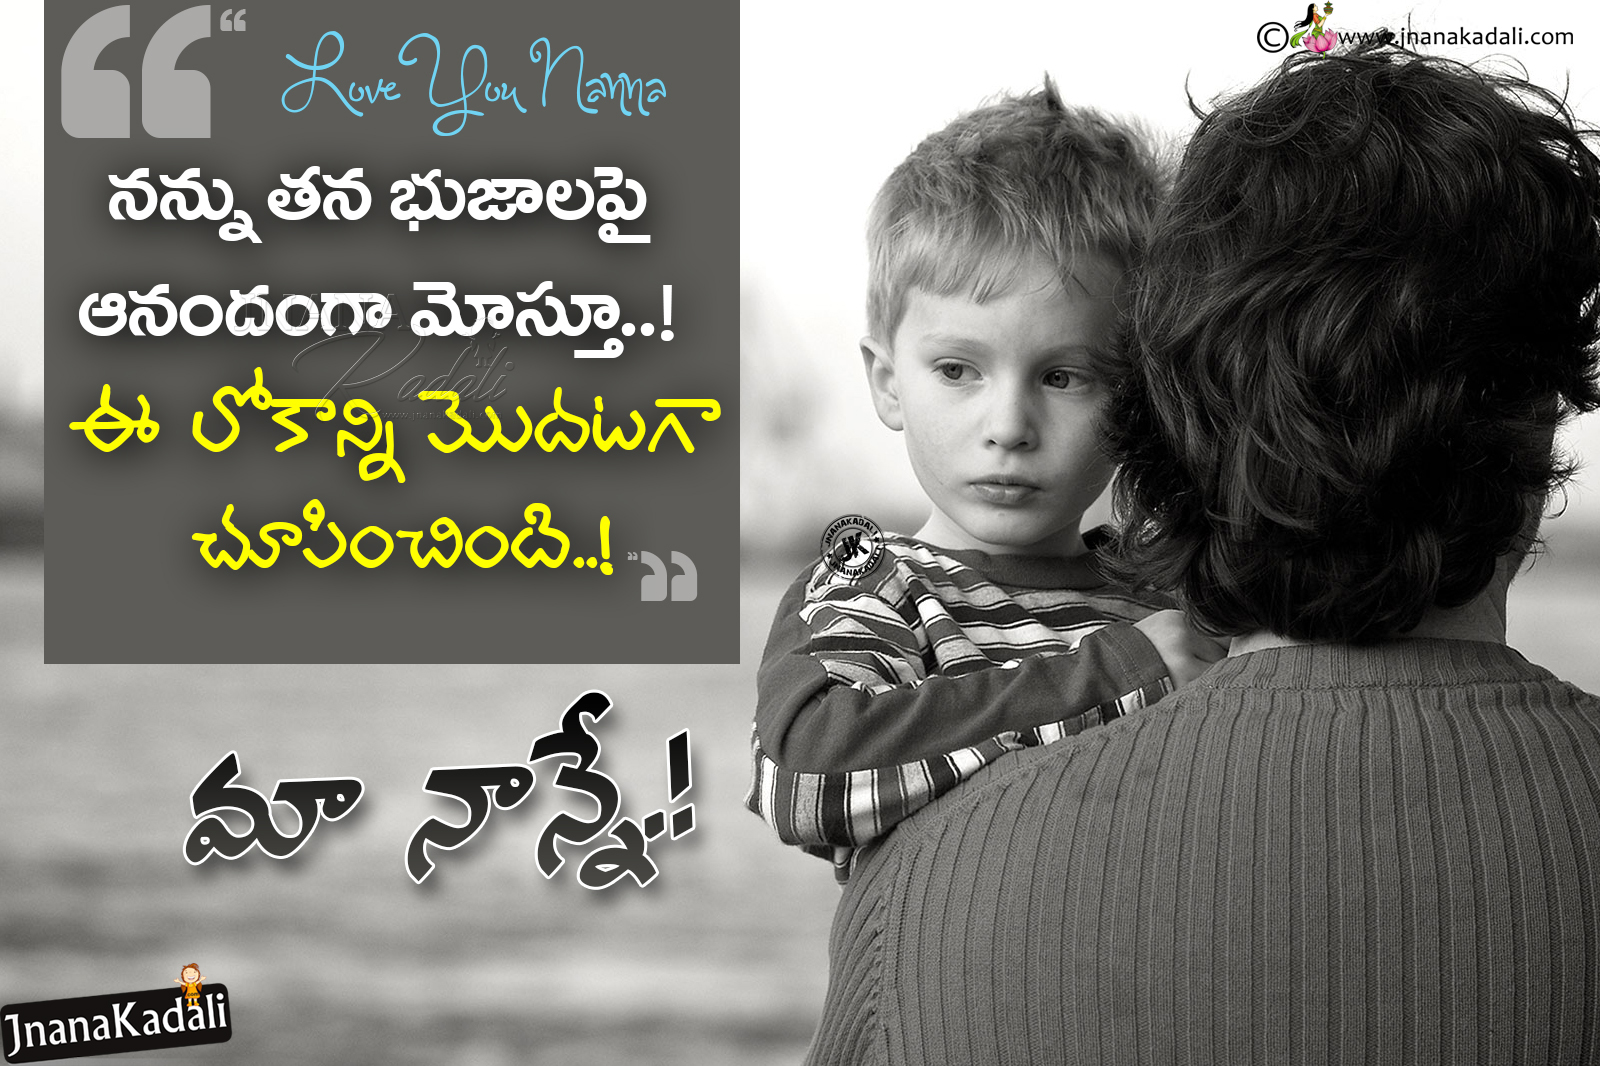 Heart Touching Nanna Father Love Quotations sms messages kavithalu ...